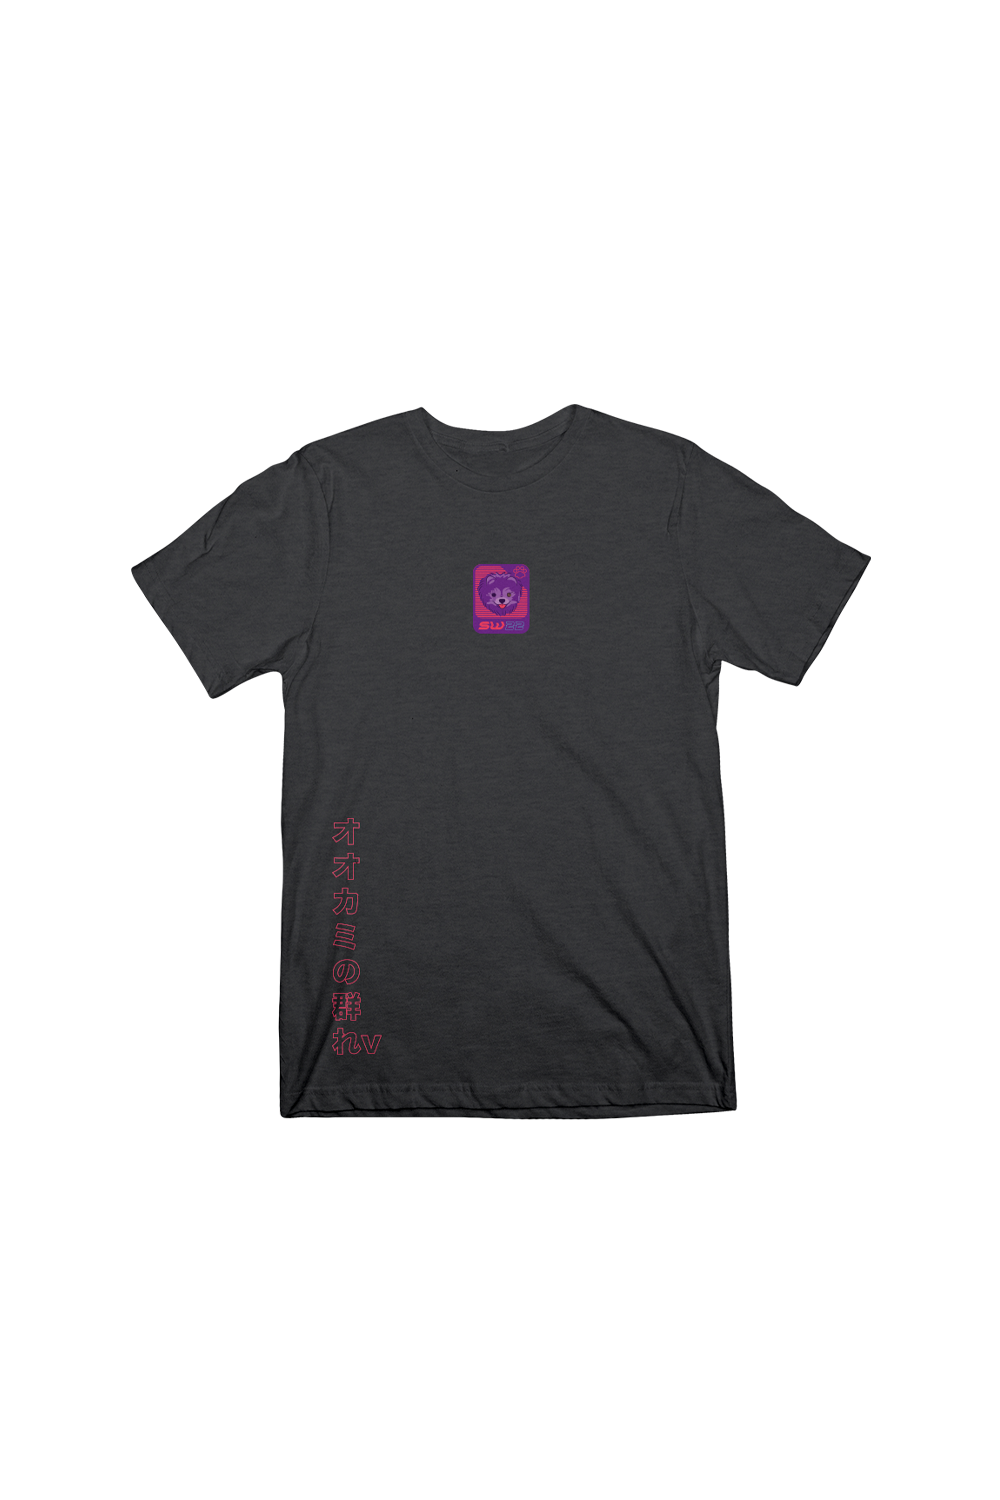 Synthwave Youth Black Shirt